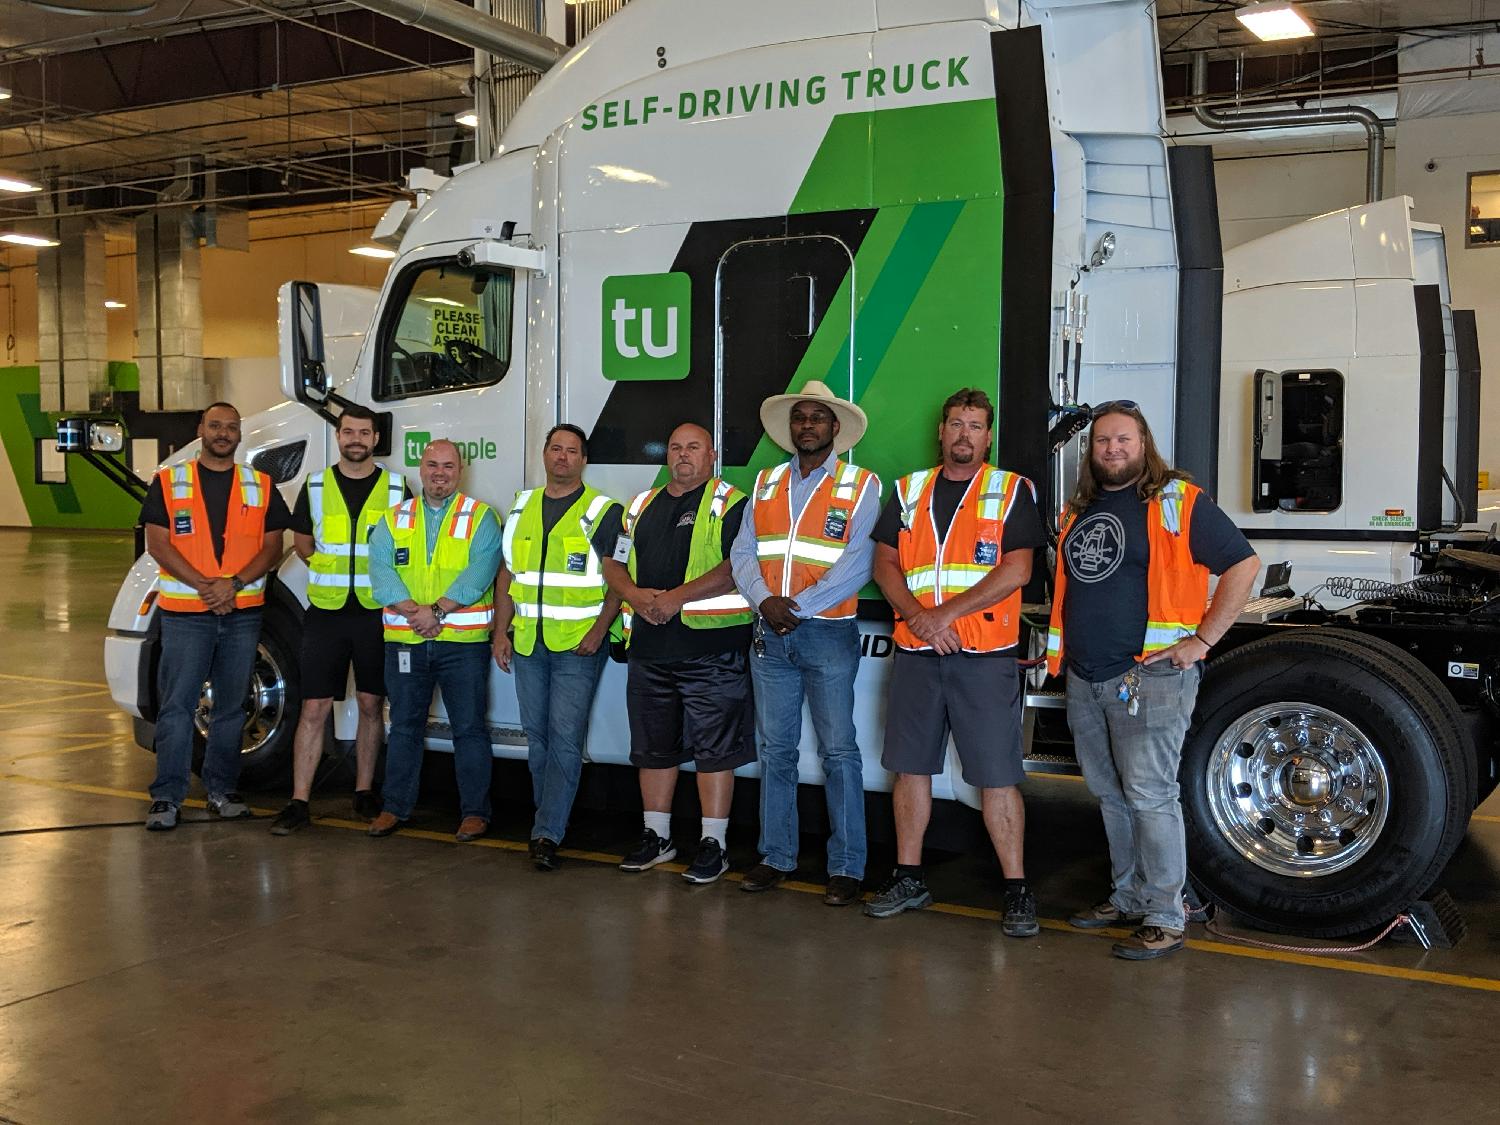 Our Tucson crew showing off our trucks. 